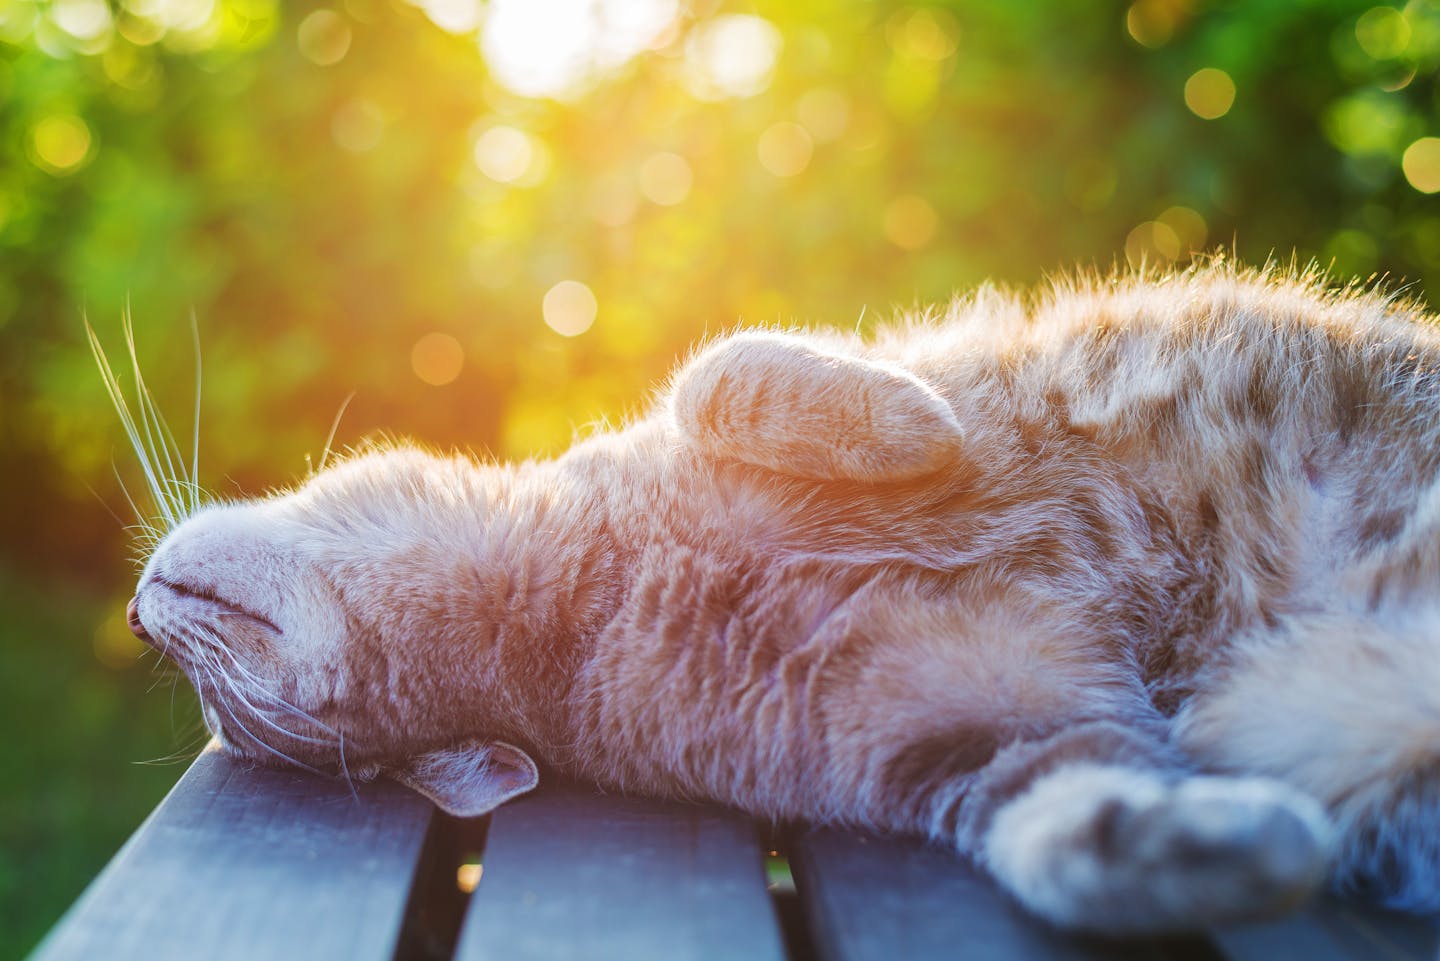 https://cdn.royalcanin-weshare-online.io/2vr01msBIYfdNSoCZR5j/v1/66-uk-global-cat-sunbathing-how-to-keep-cats-cool-in-the-summer-article-colour?w=1440&auto=compress&fm=jpg